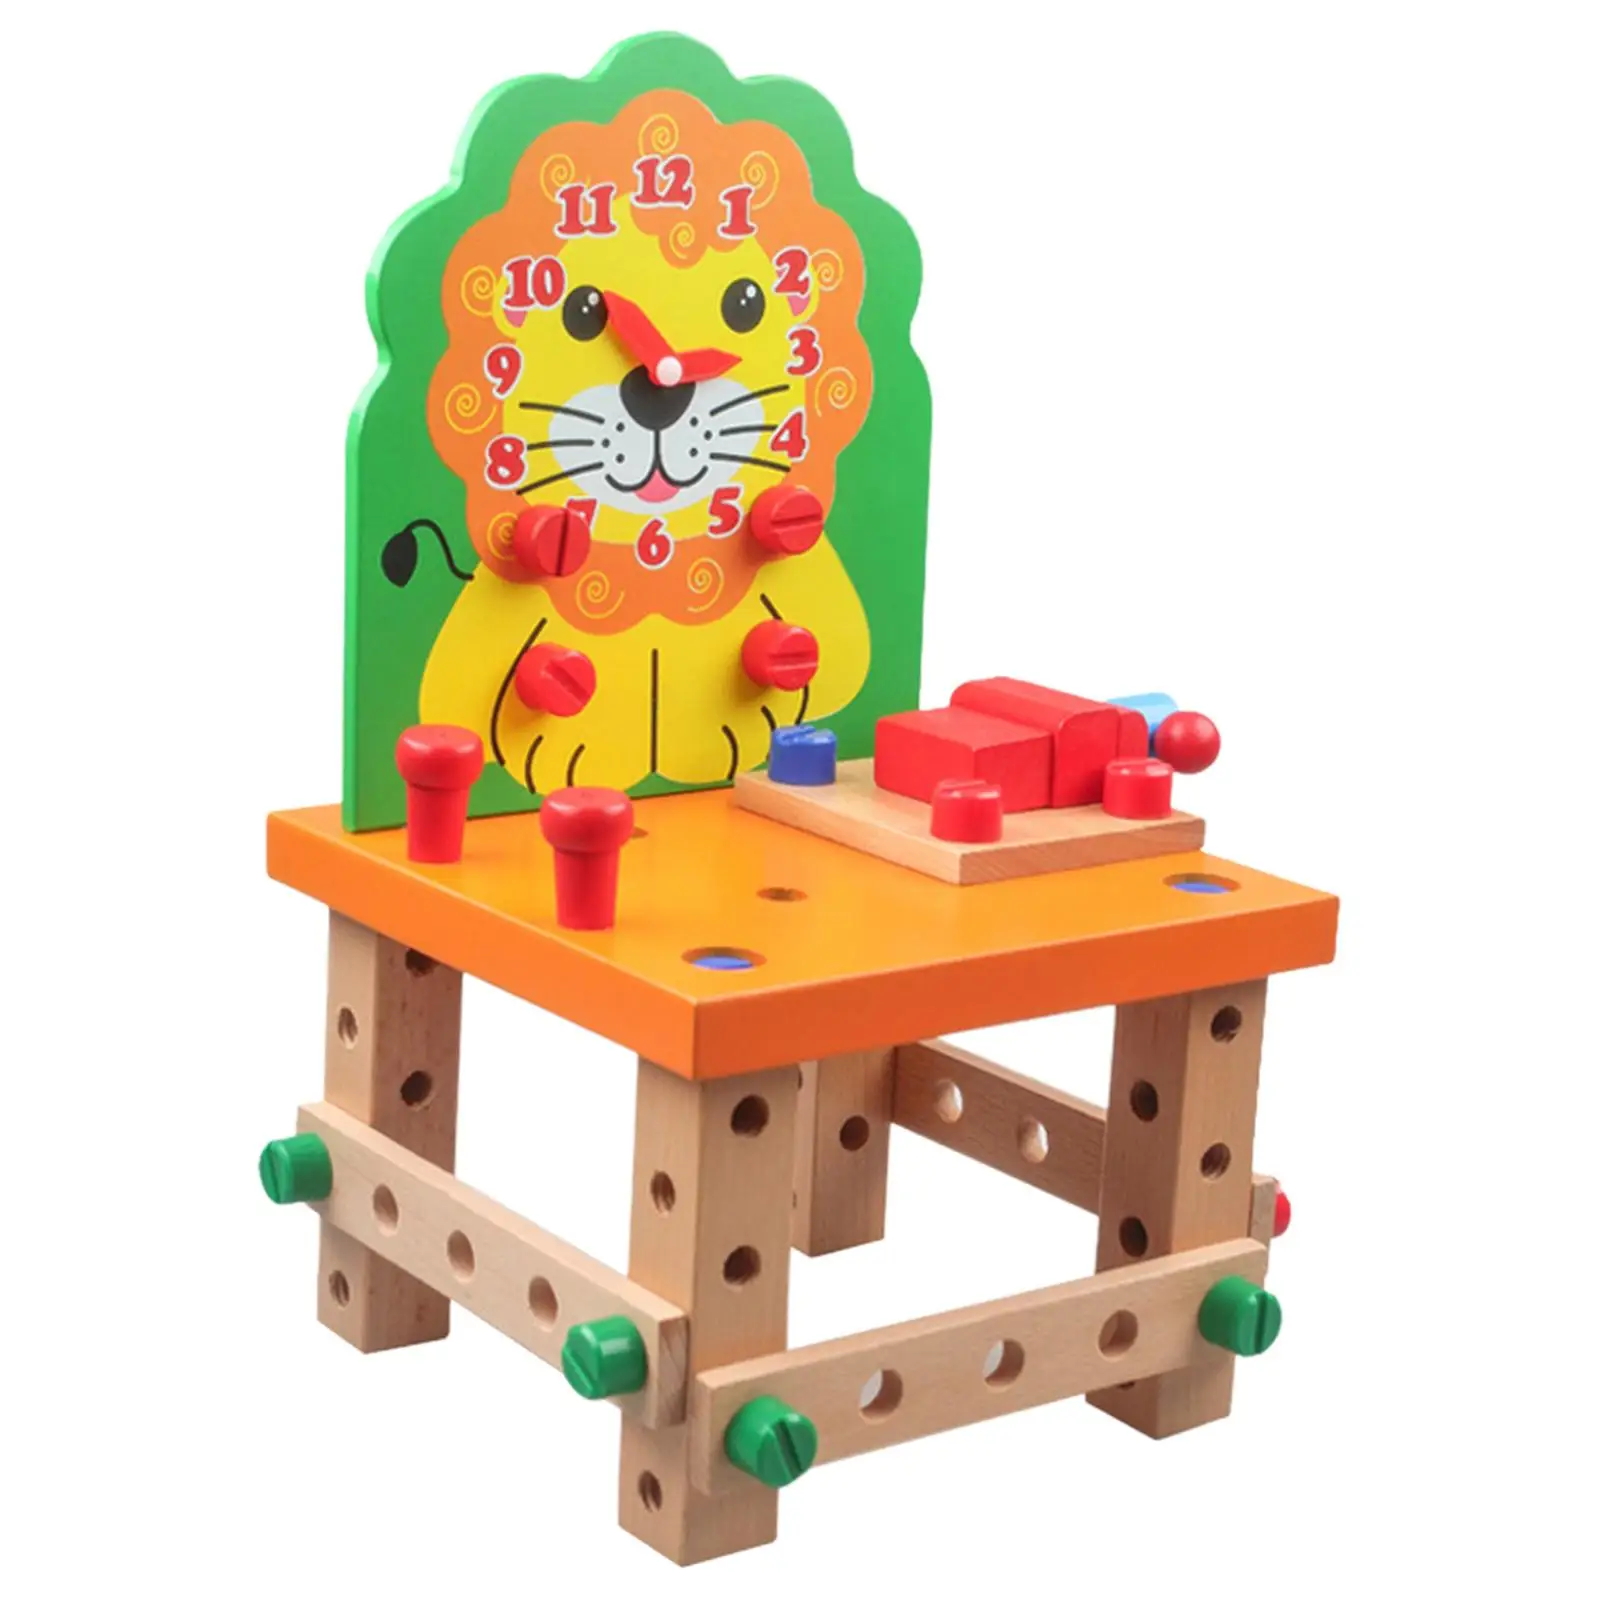 Wooden Chair Models Construction Play Set with Tools for Children Girls Boys